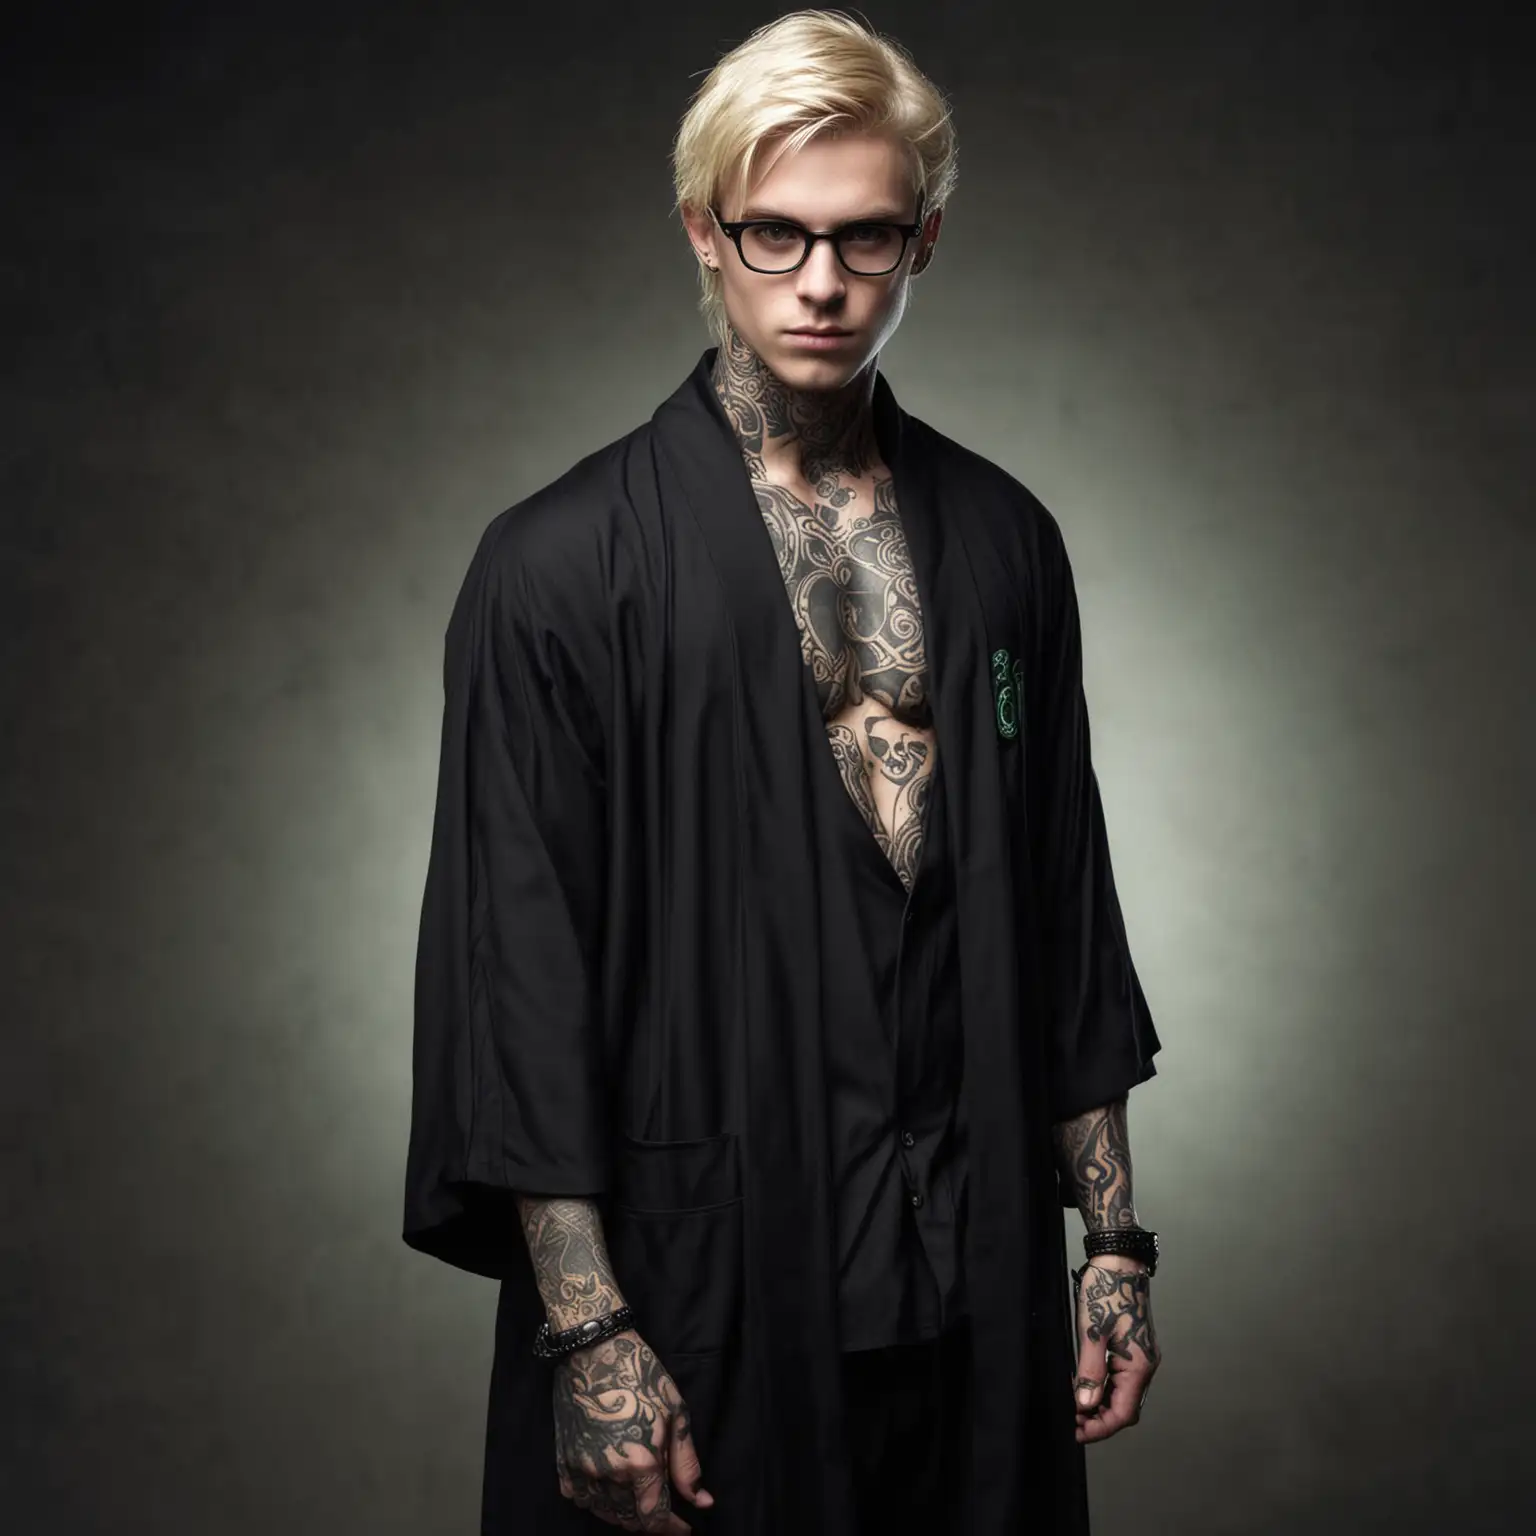 Teen boy, Death Eater, Slytherin, tattoos, shirtless, piercings, blonde, bulge, crotch, attractive, abs, magic, sexy, glasses, sinister, dangerous, mysterious, black school robe